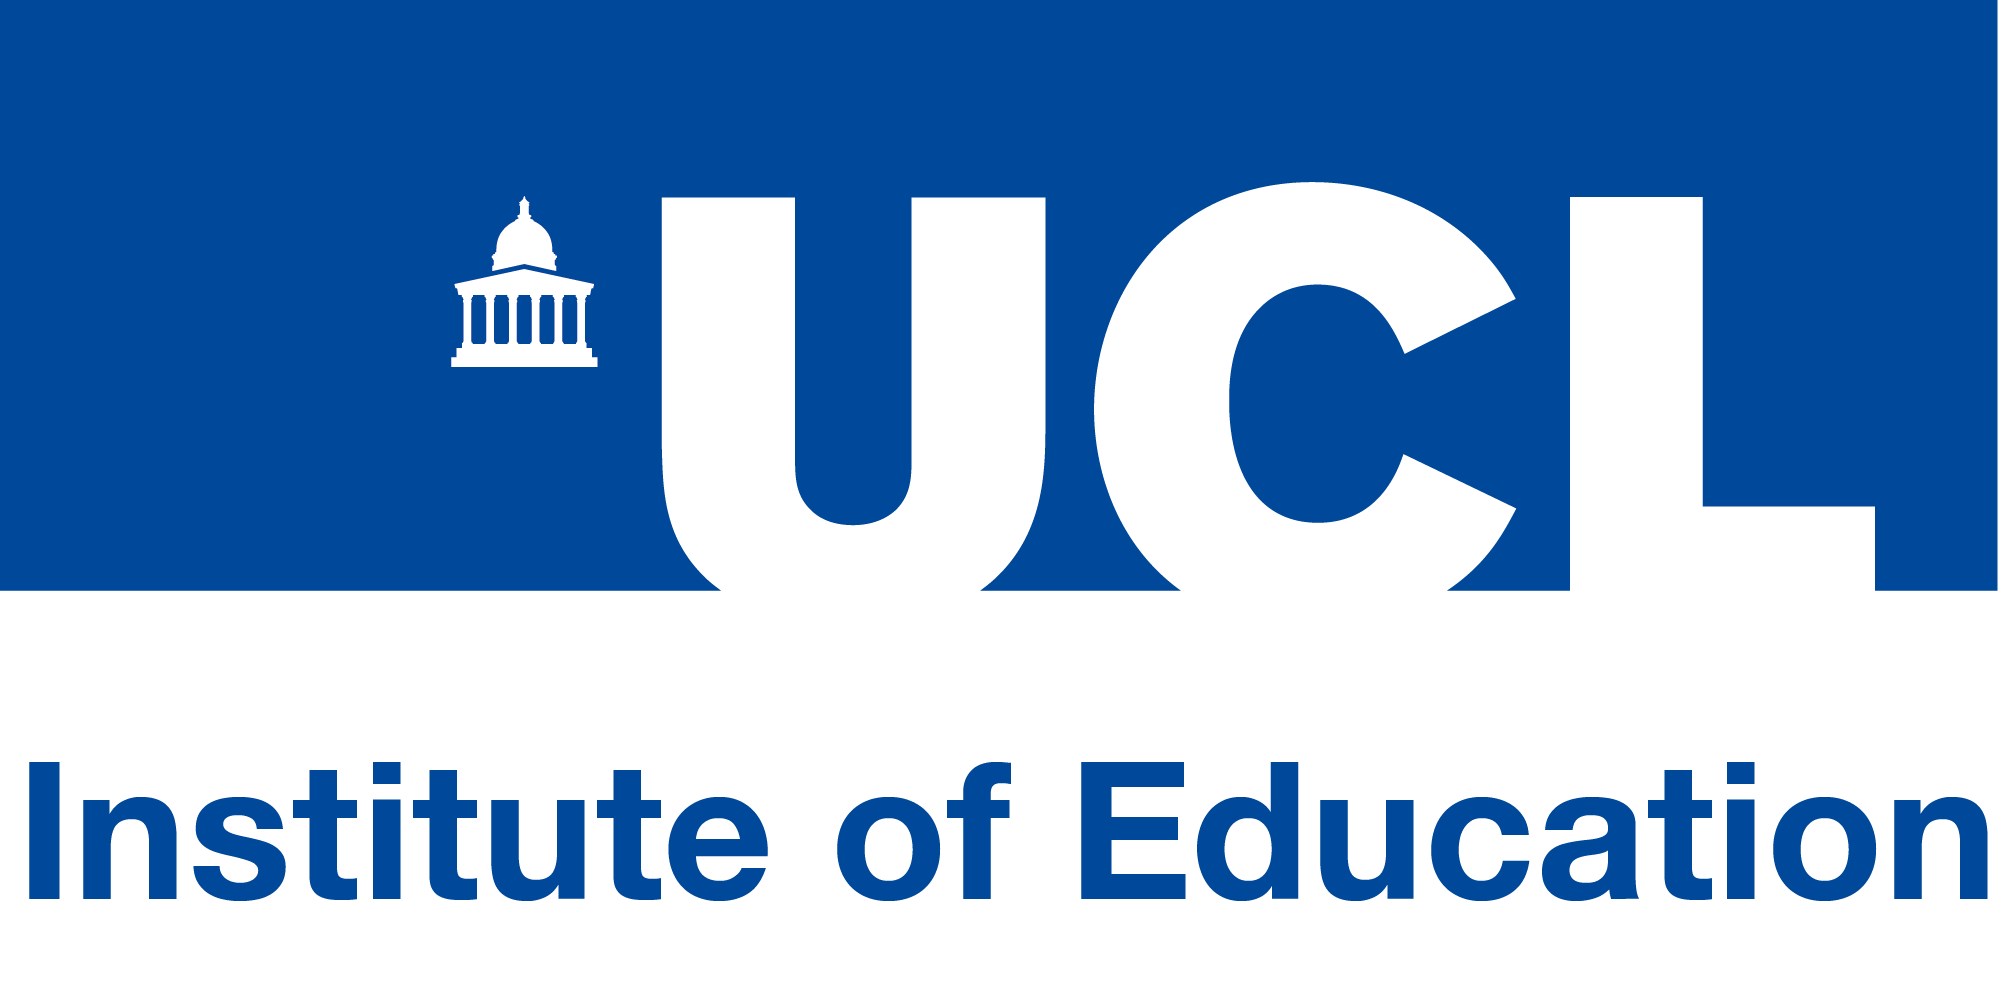 File:UCL Institute of Education logo.png - Wikipedia